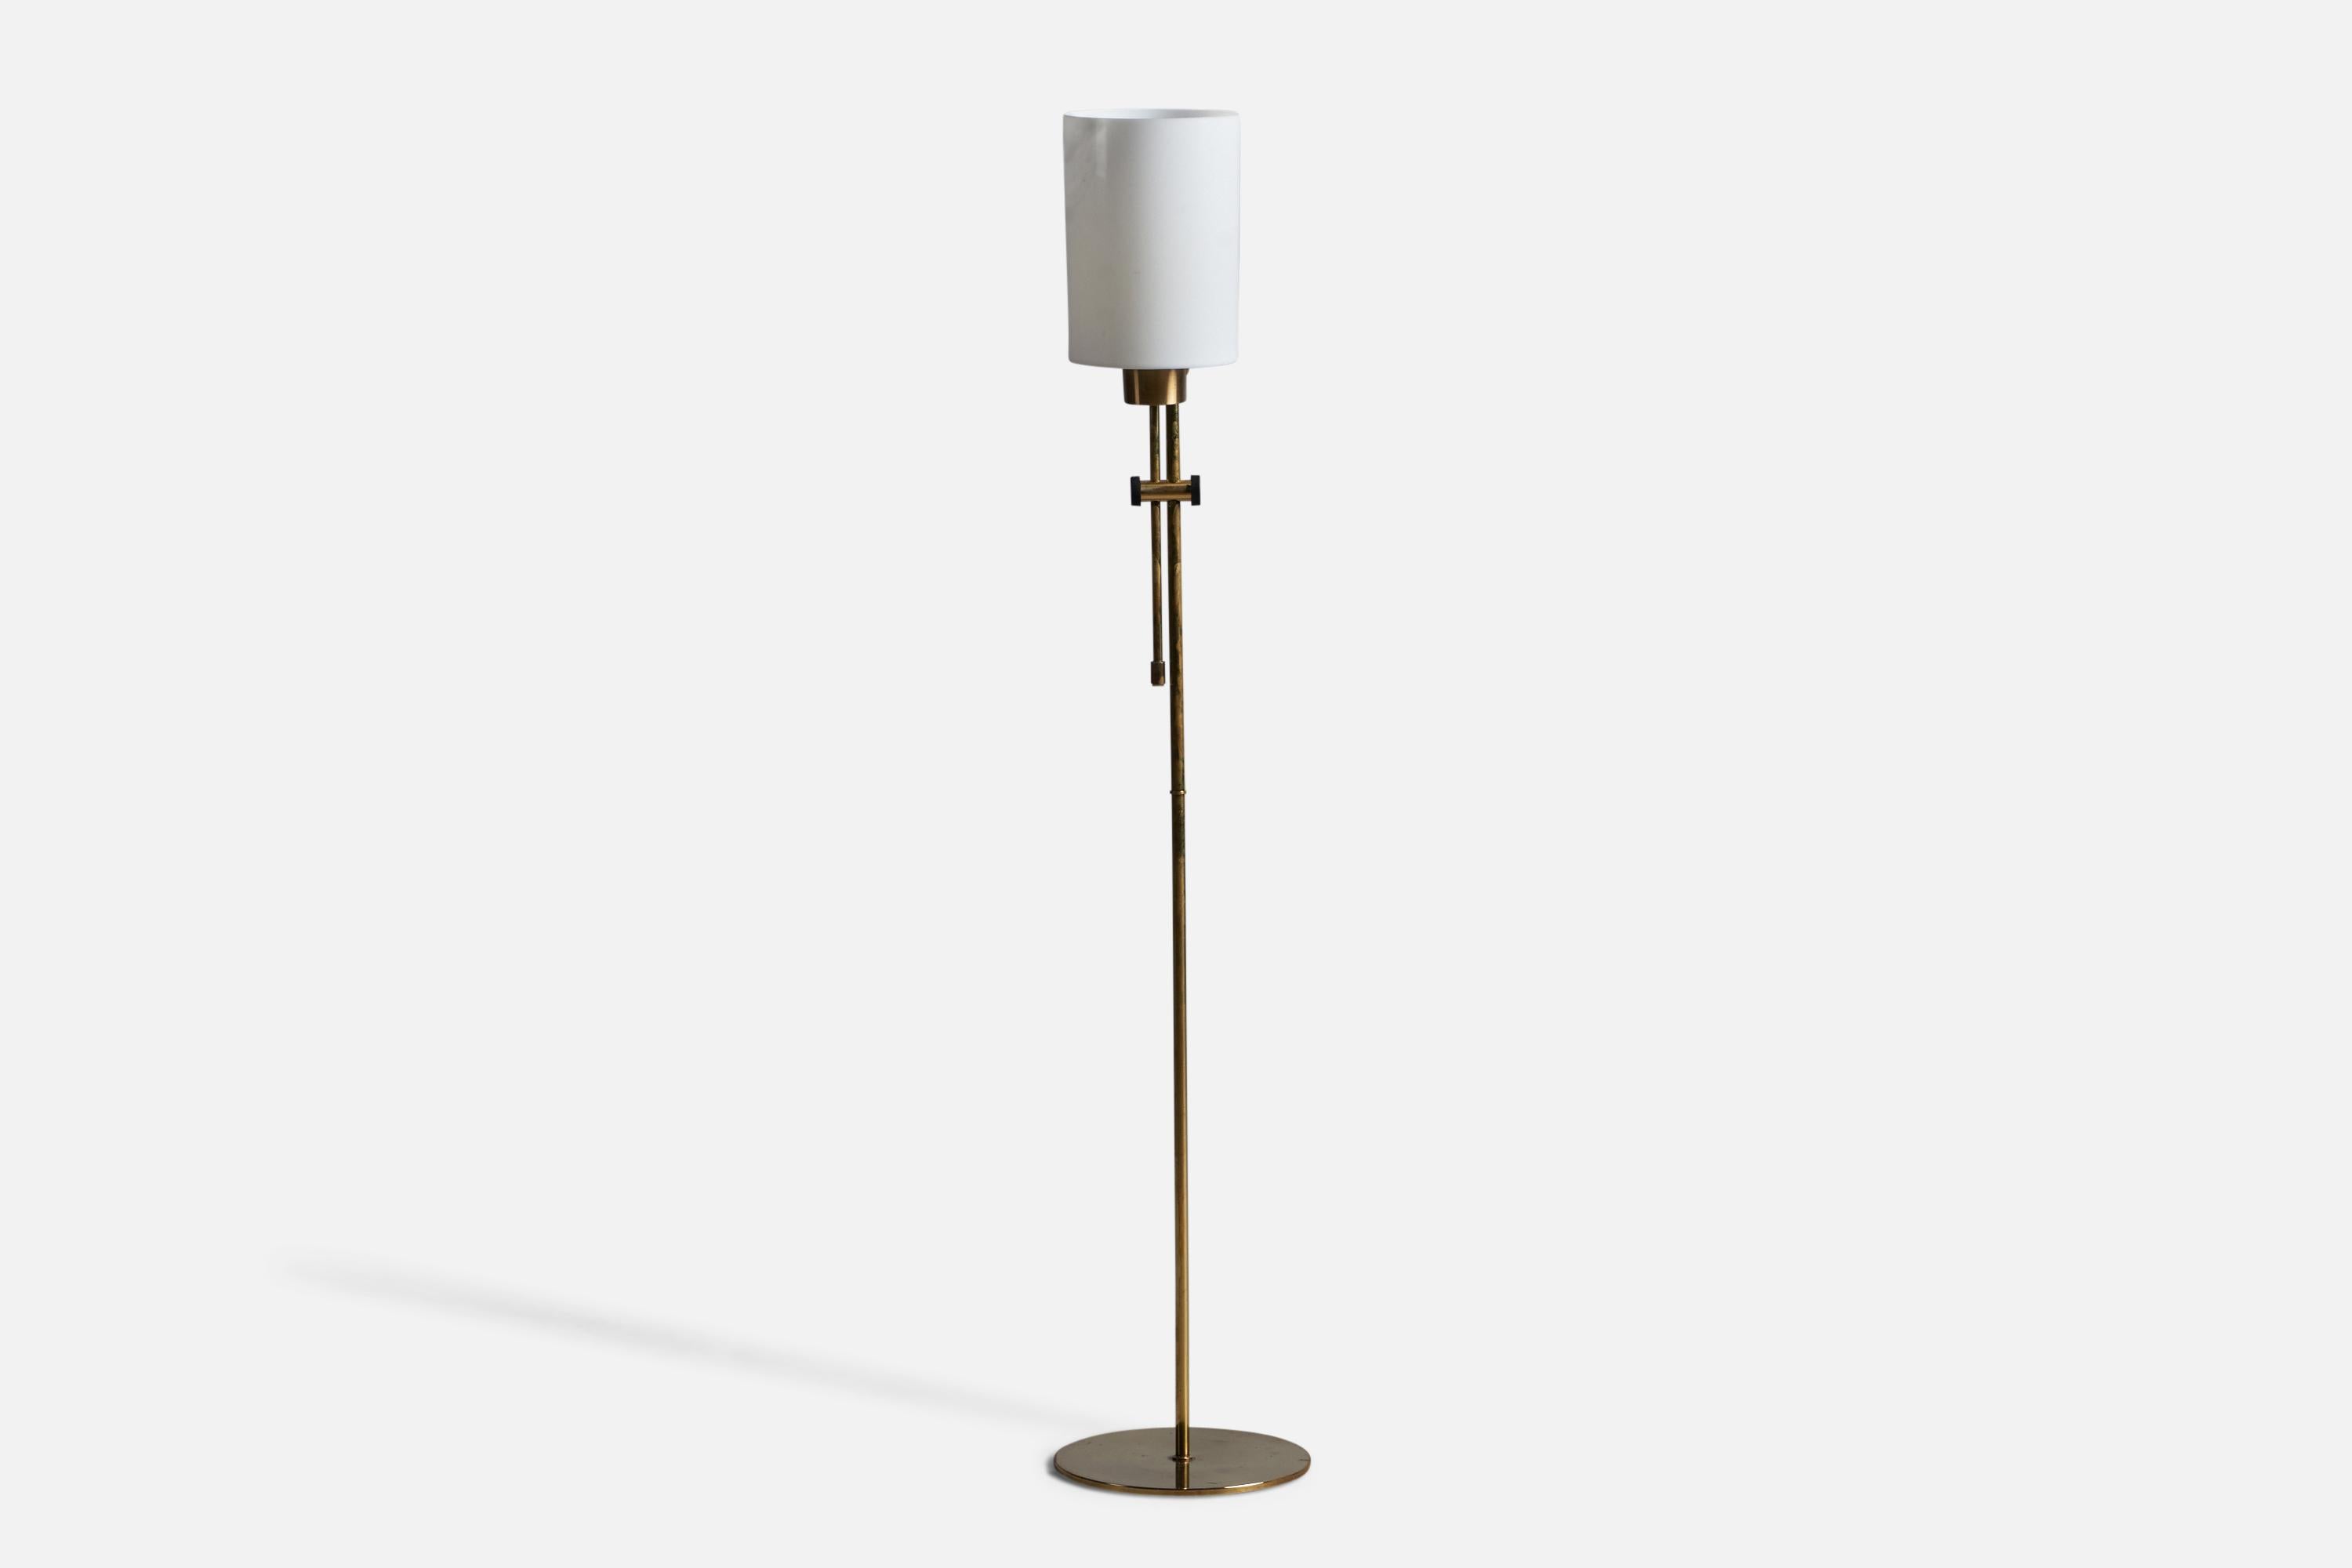 A pair of brass, acrylic and plastic floor lamps, designed and produced by Gemi, Sweden, c. 1970s.

Tallest Dimensions (inches): 55.4